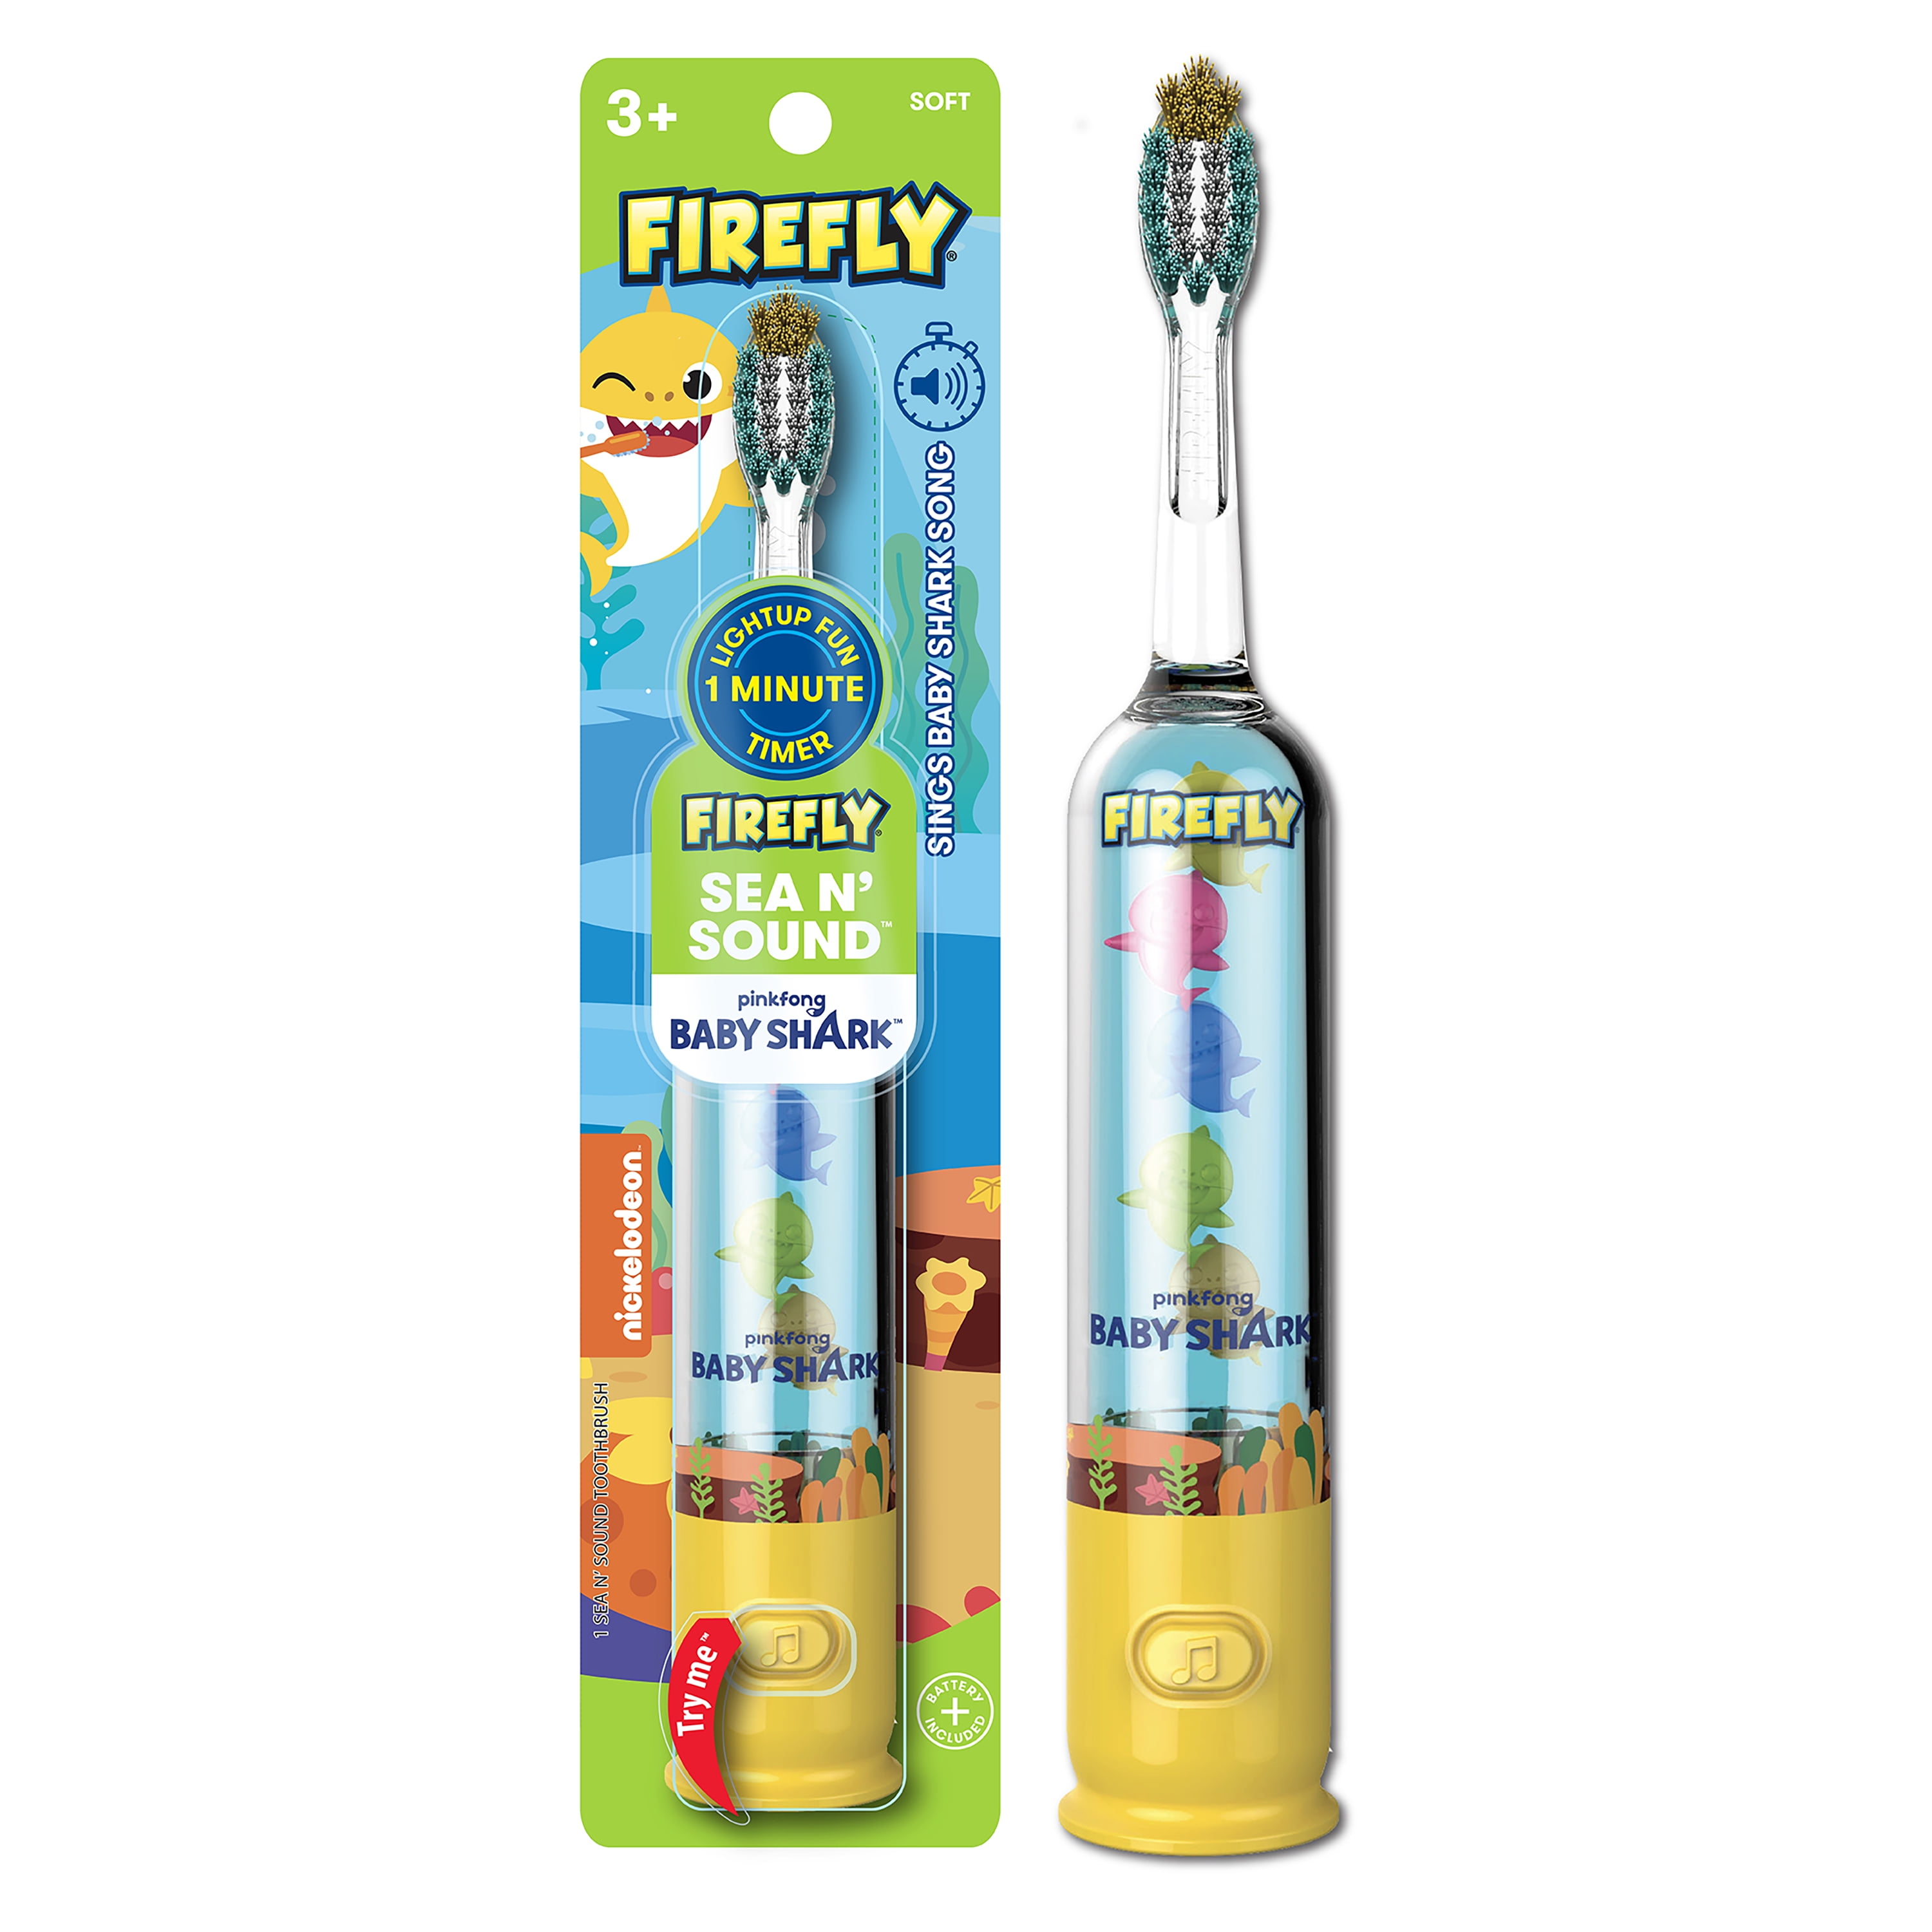 Firefly Sea N' Sound, Baby Shark Toothbrush, Premium Soft Bristles, 1 Minute Timer, Less Mess Suction Cup, Battery Included, Easy Storage, Dentist Recommended, For Ages 3+, 1 Count